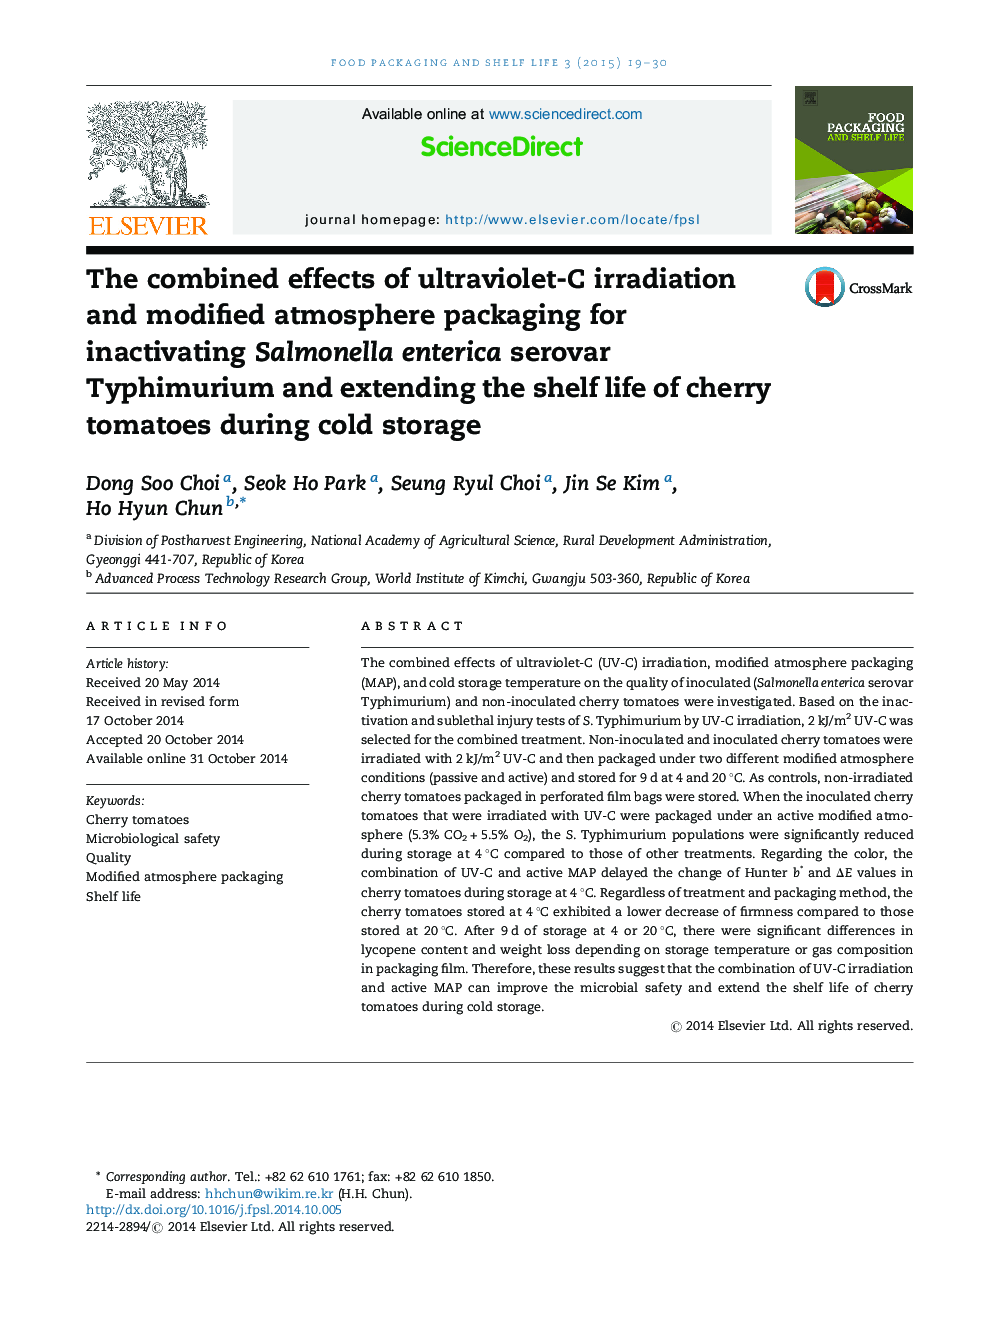 The combined effects of ultraviolet-C irradiation and modified atmosphere packaging for inactivating Salmonella enterica serovar Typhimurium and extending the shelf life of cherry tomatoes during cold storage